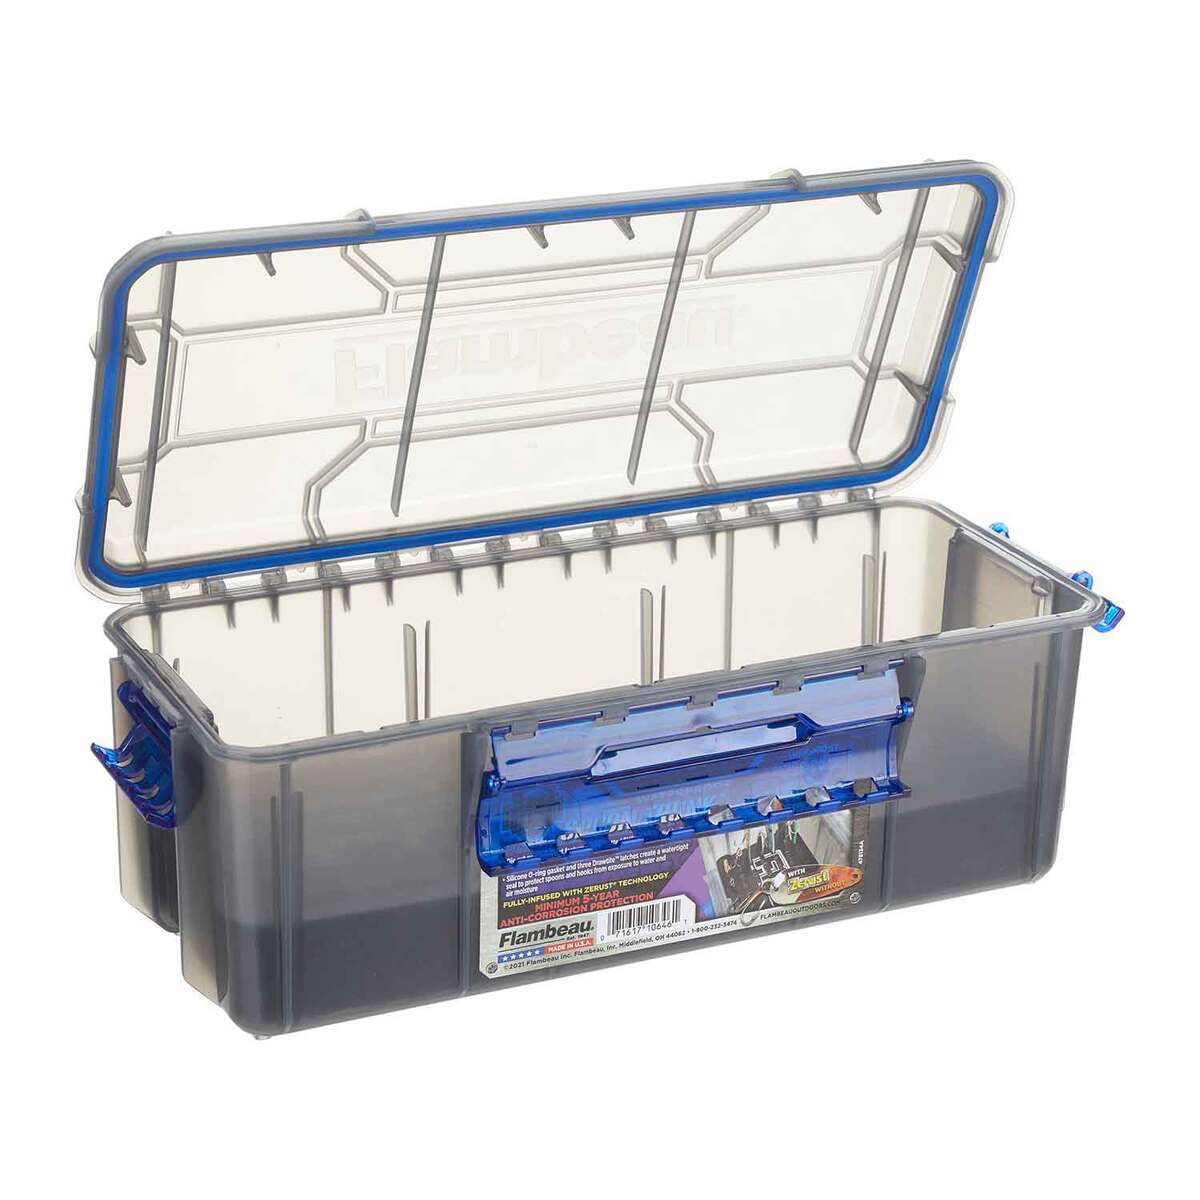 Fishing Tackle Boxes, Made in the USA